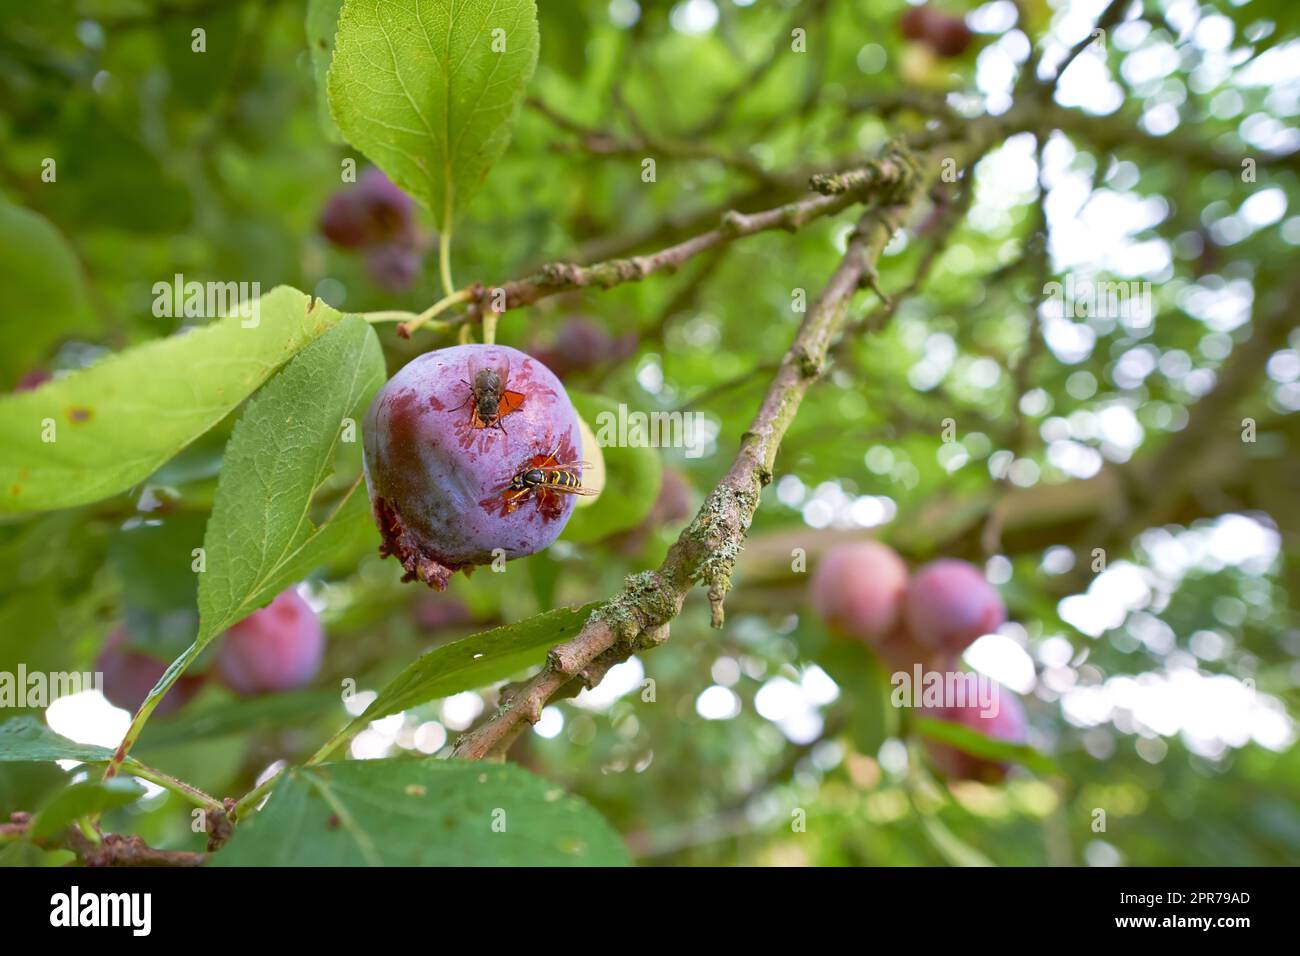 Closeup of wasps eating ripe plums growing on a tree in a garden or field. Details of wildlife in nature, organic fruit hanging from branches in rural countryside with copyspace Stock Photo